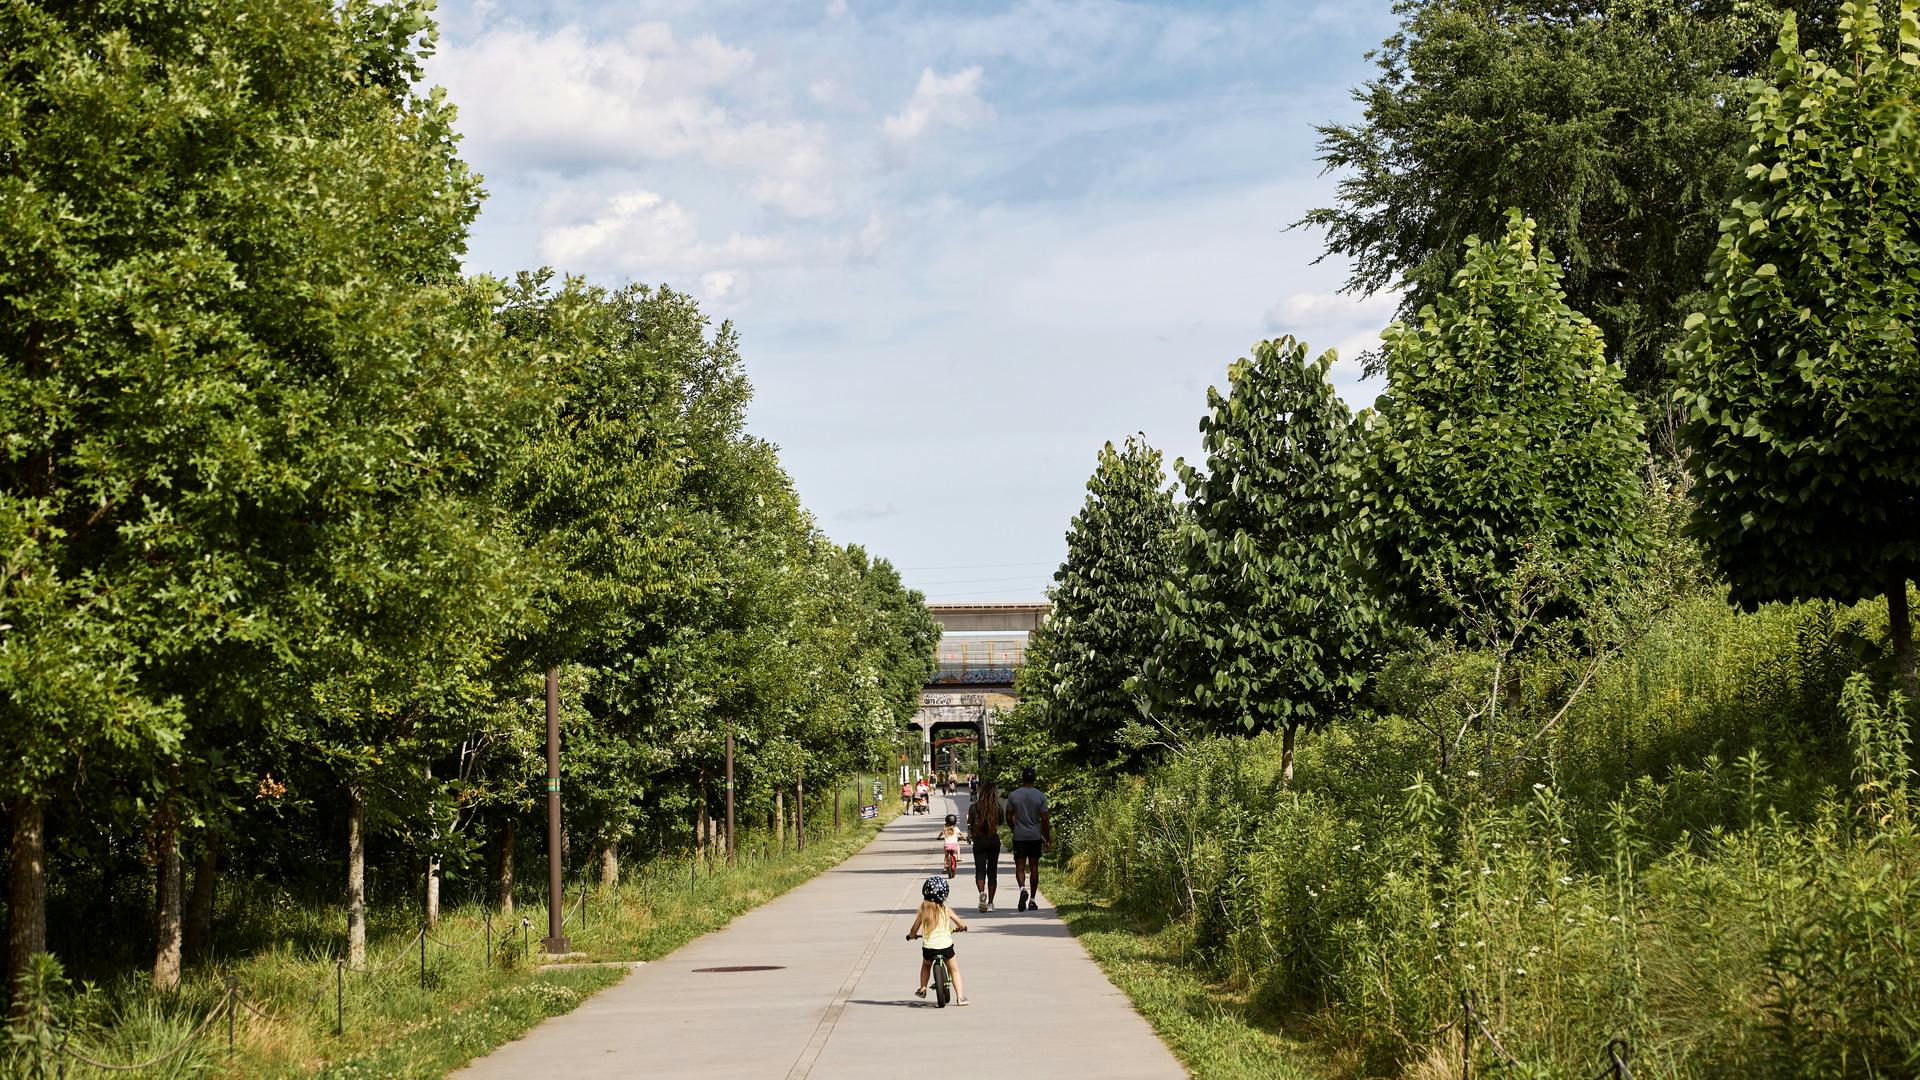 People walk along a trail surrounded by greenery.